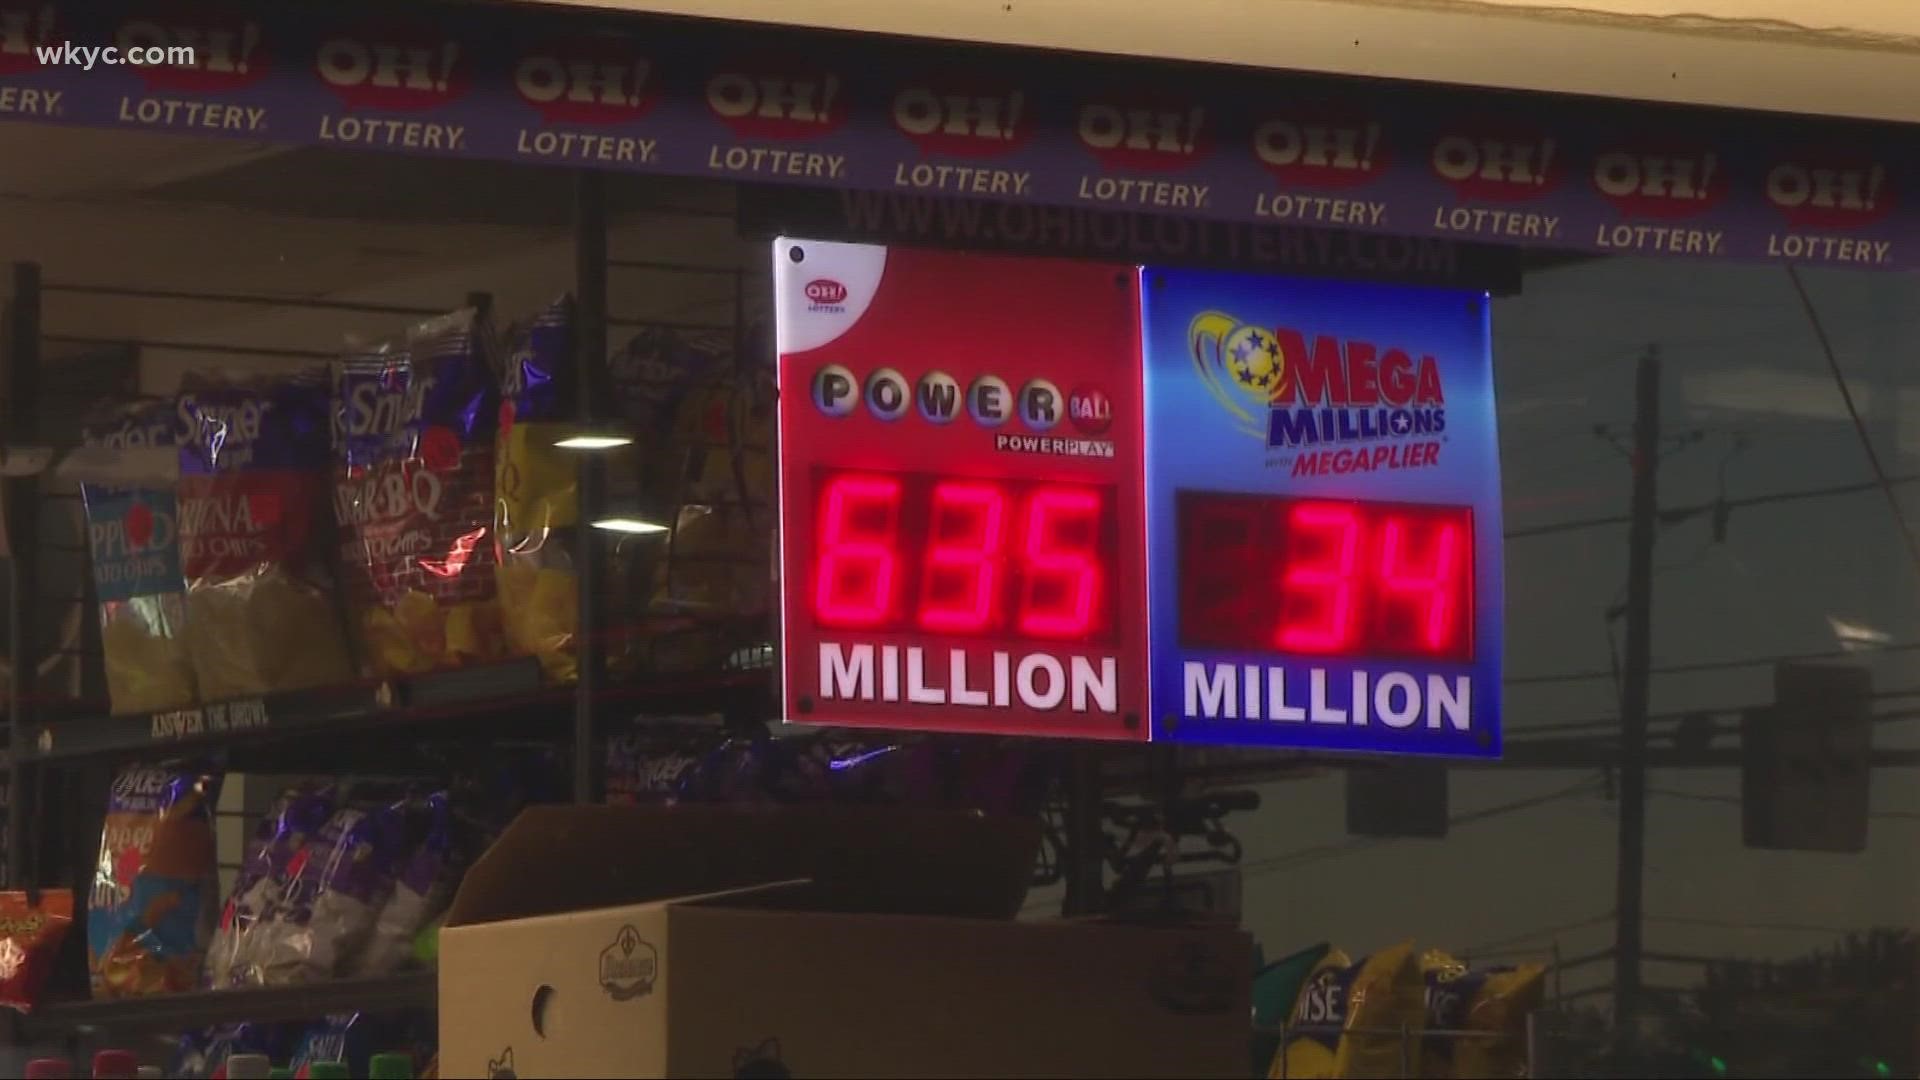 While the jackpot increases, the chance of winning all that money remains the same. There have now been 39 Powerball drawings in a row without a grand prize winner.